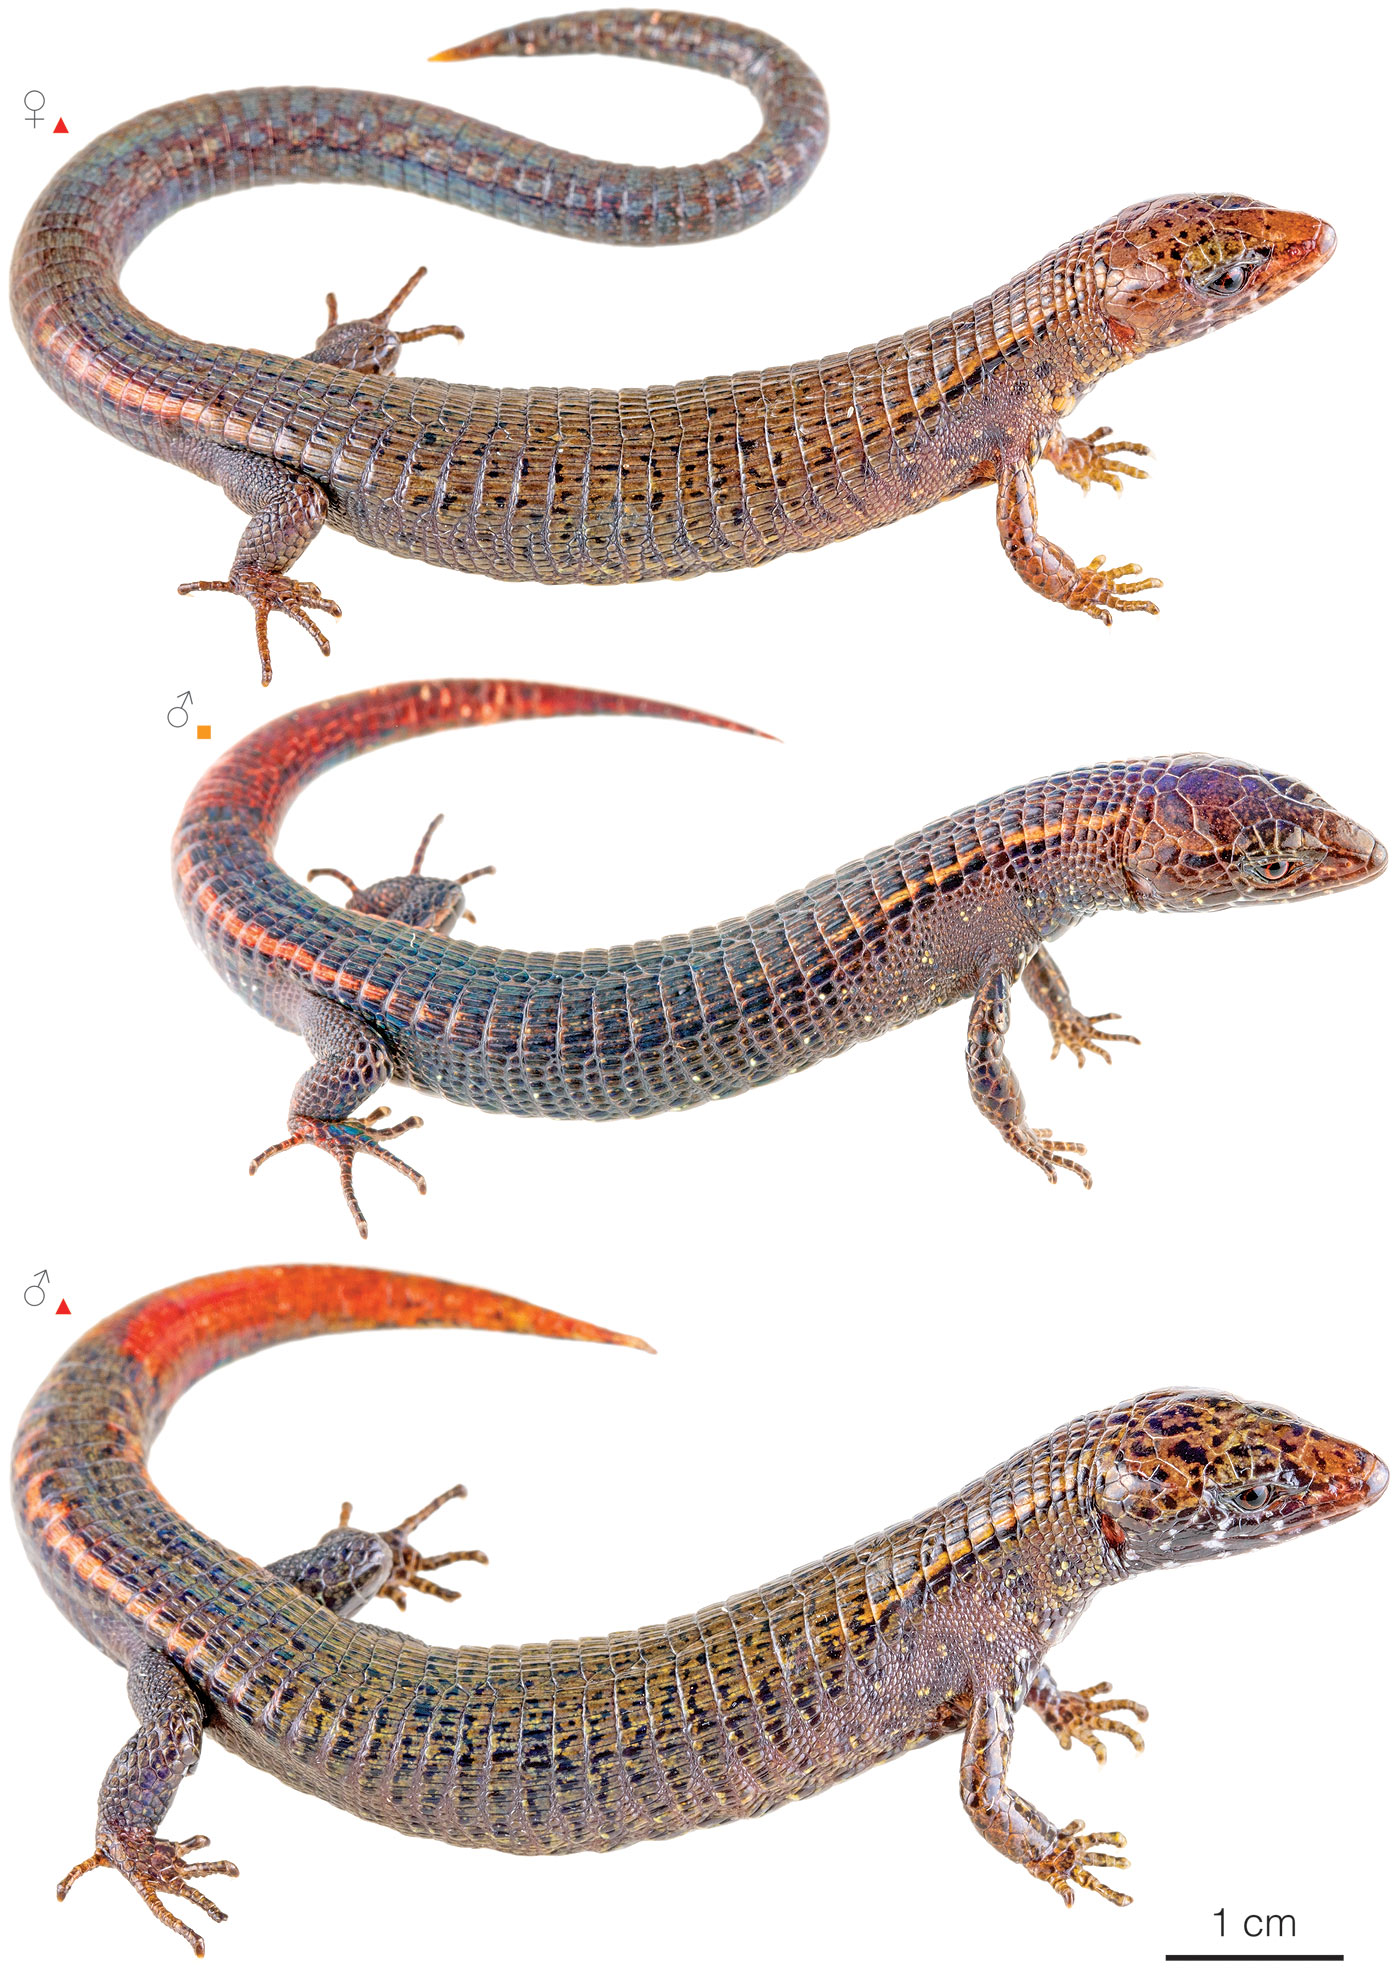 Variation among individuals of Riama orcesi